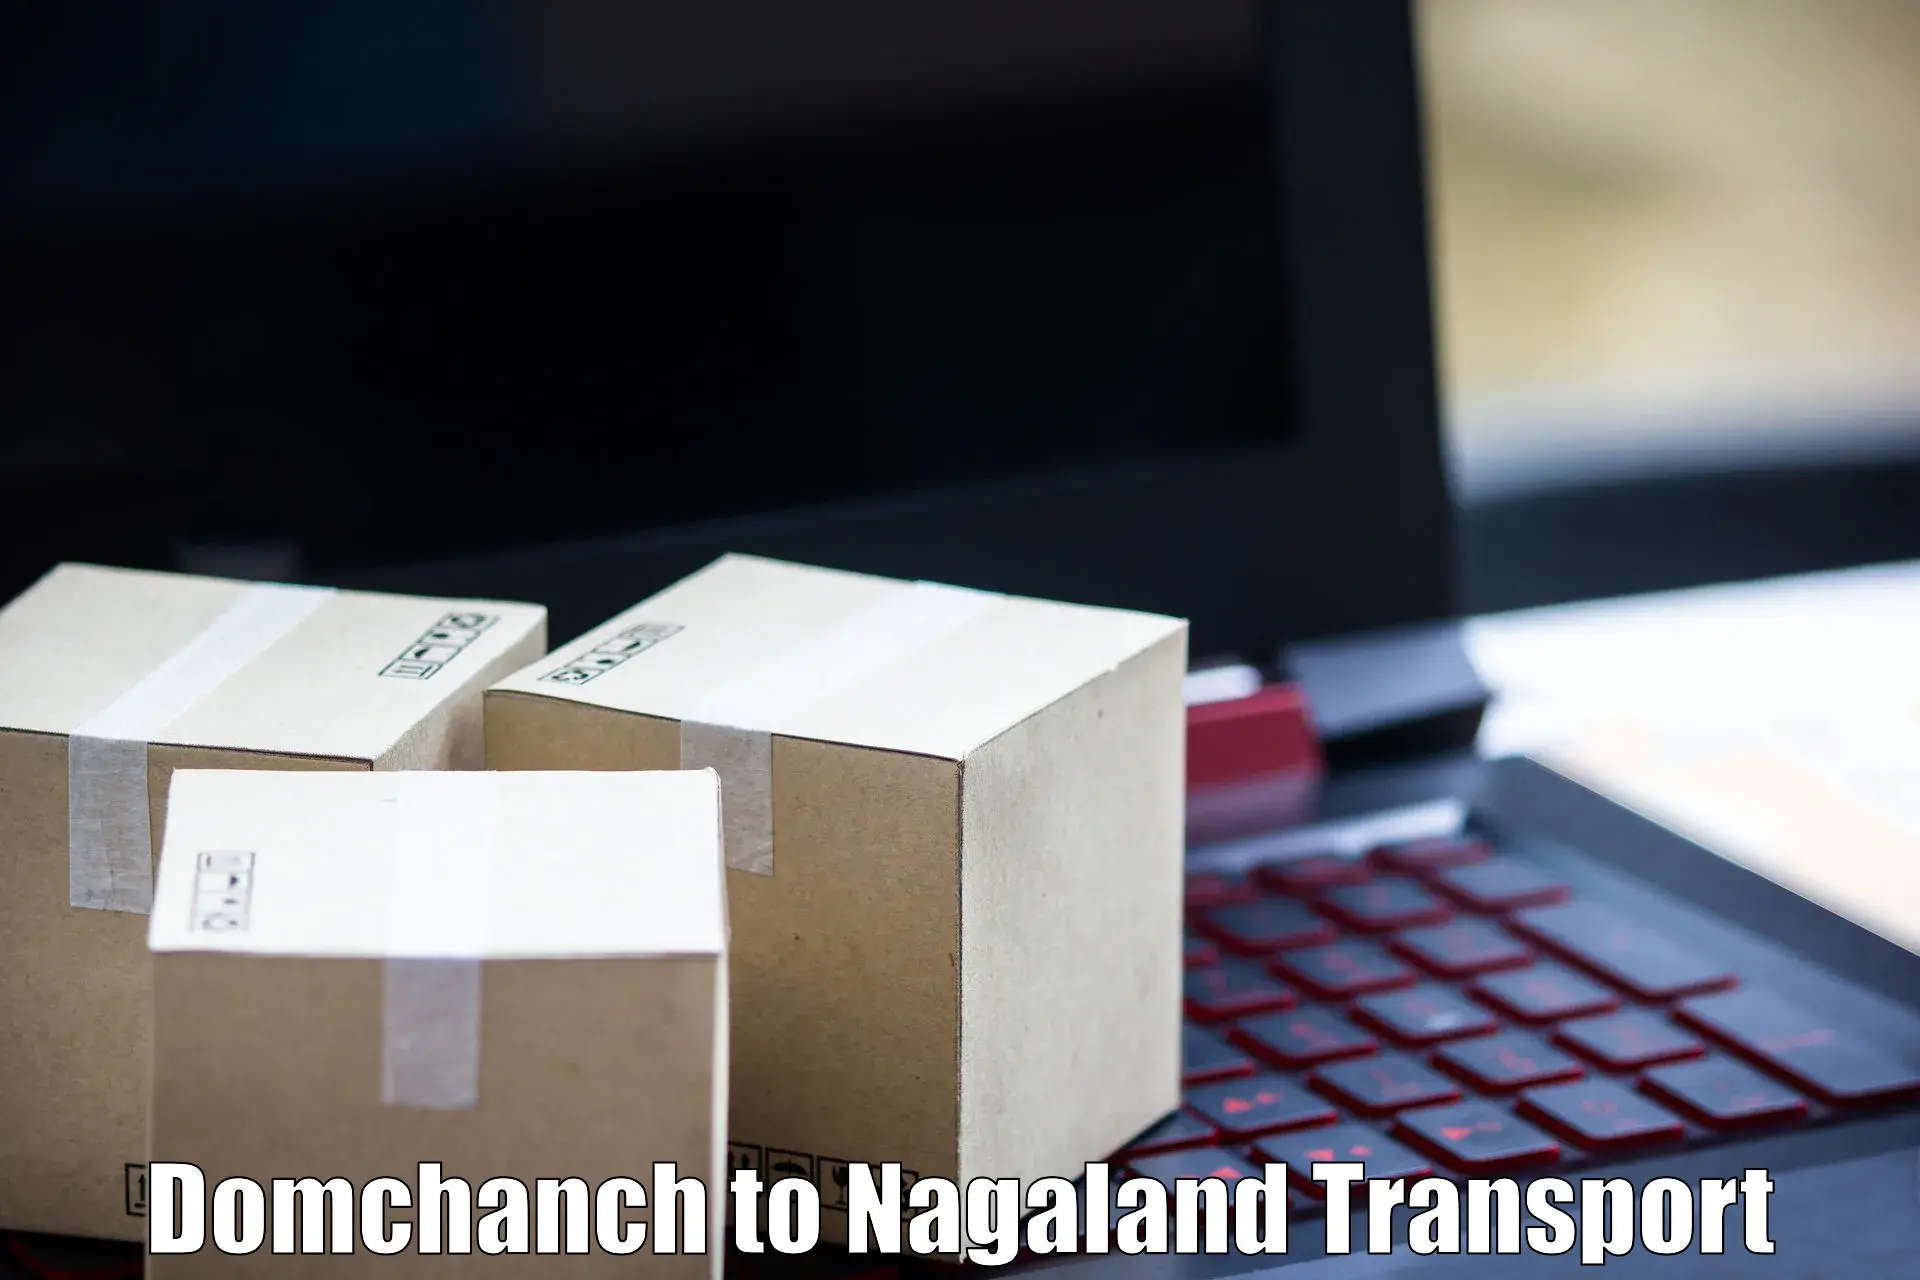 Daily transport service Domchanch to Nagaland